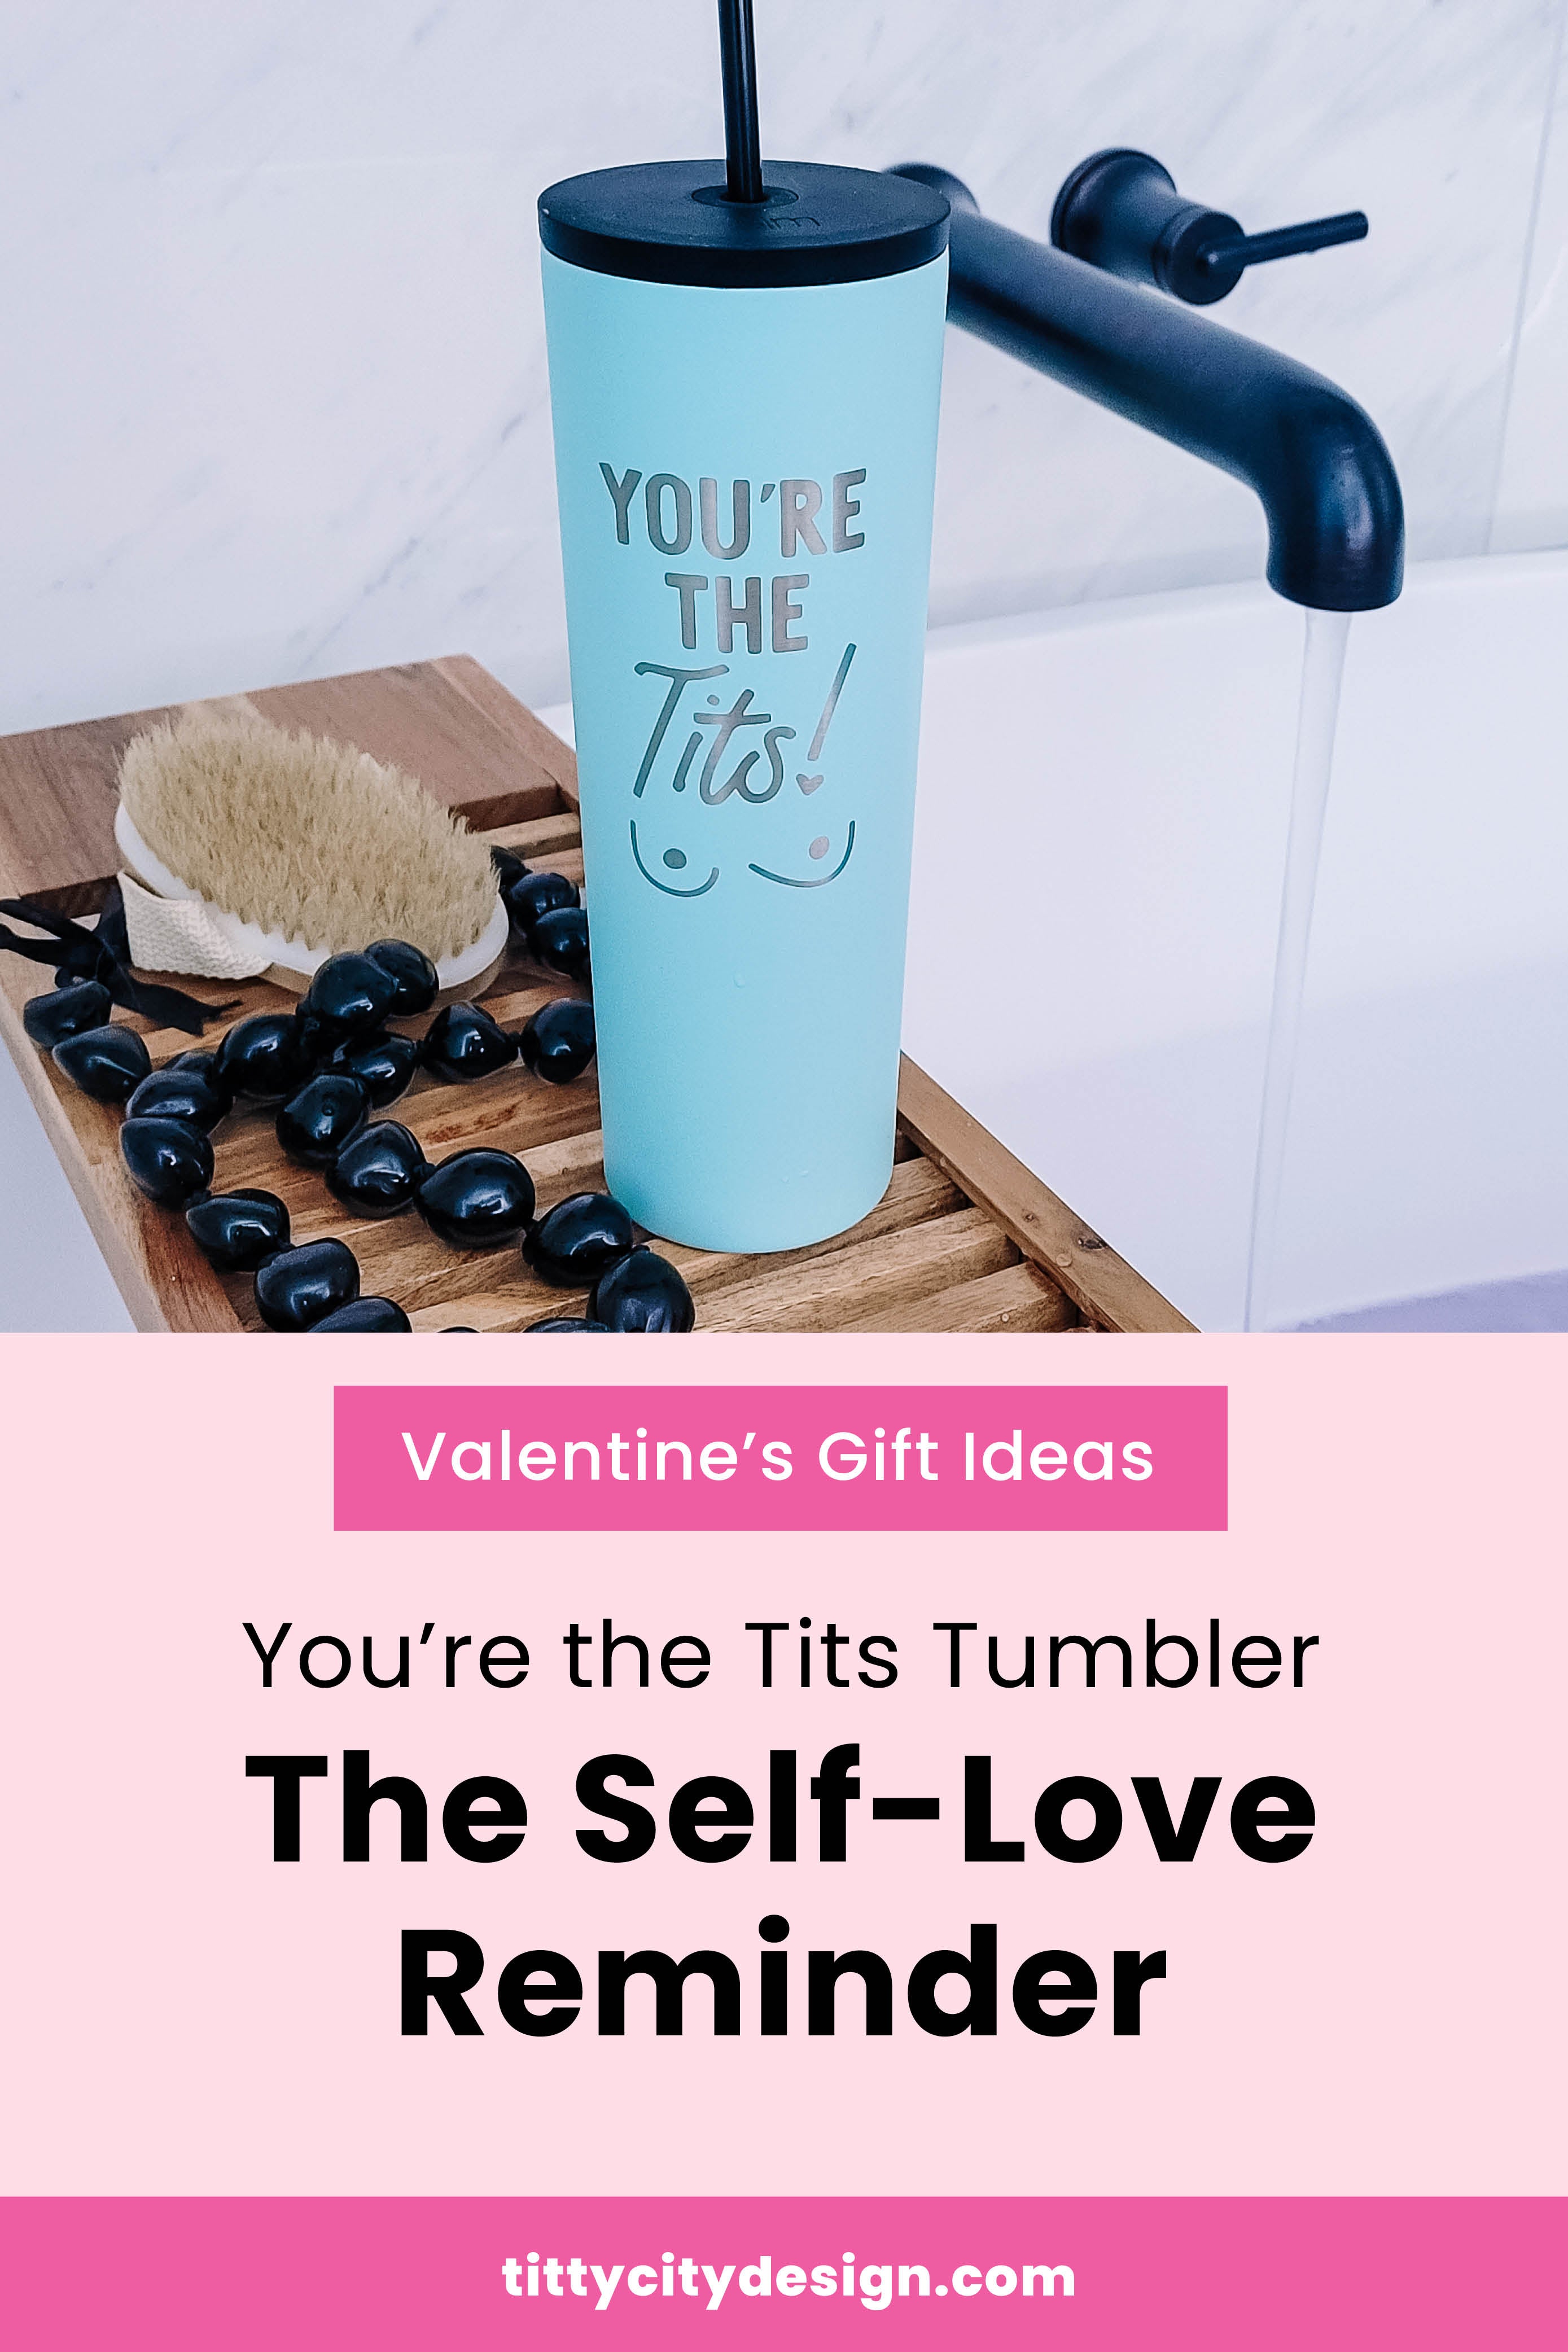 Valentines Gift Ideas - You're the Tits Water Bottle "The Self-love Reminder"